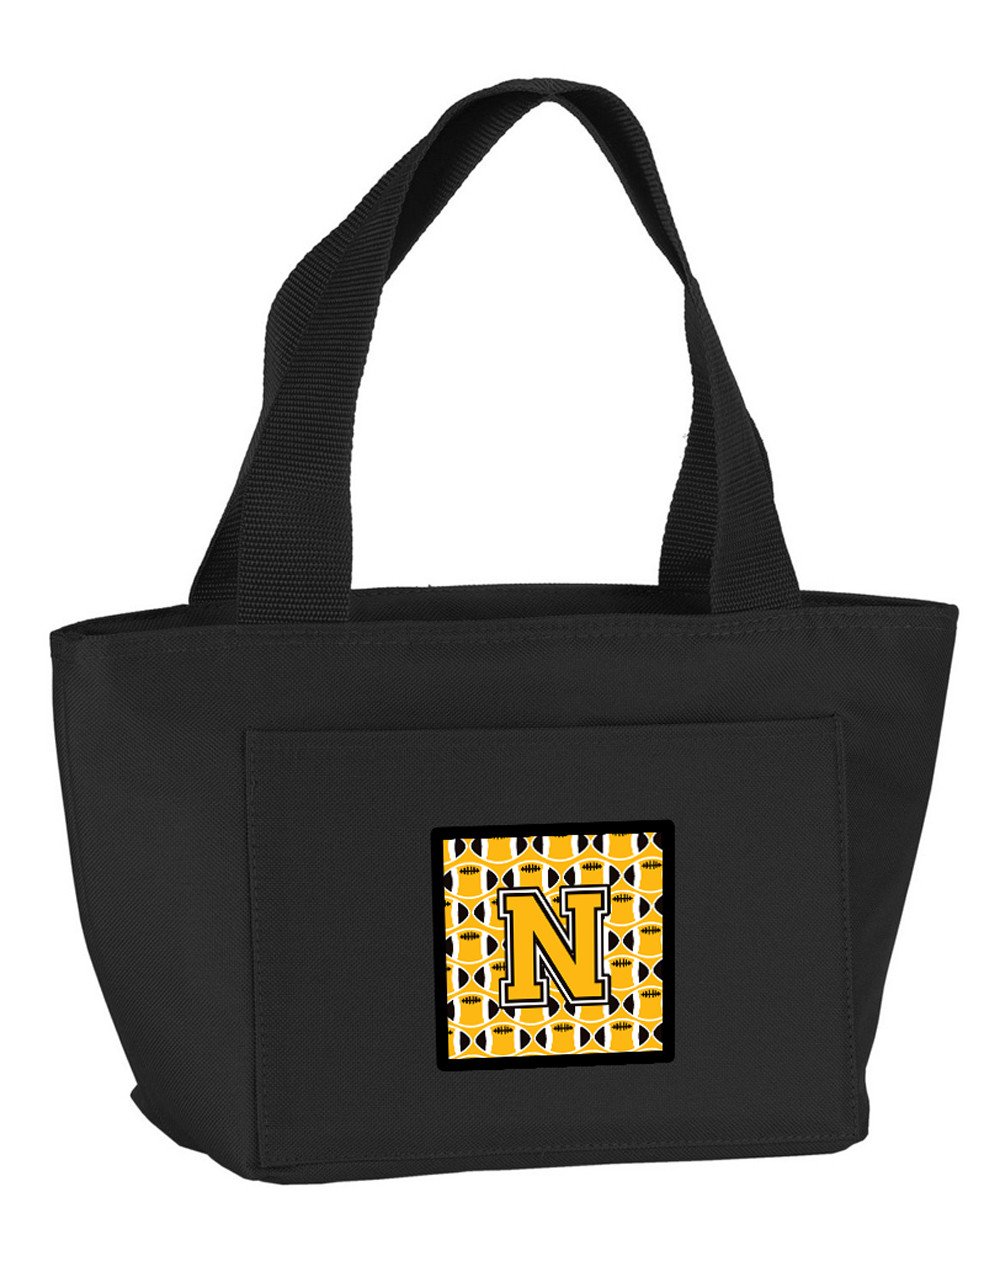 Letter N Football Black, Old Gold and White Lunch Bag CJ1080-NBK-8808 by Caroline's Treasures